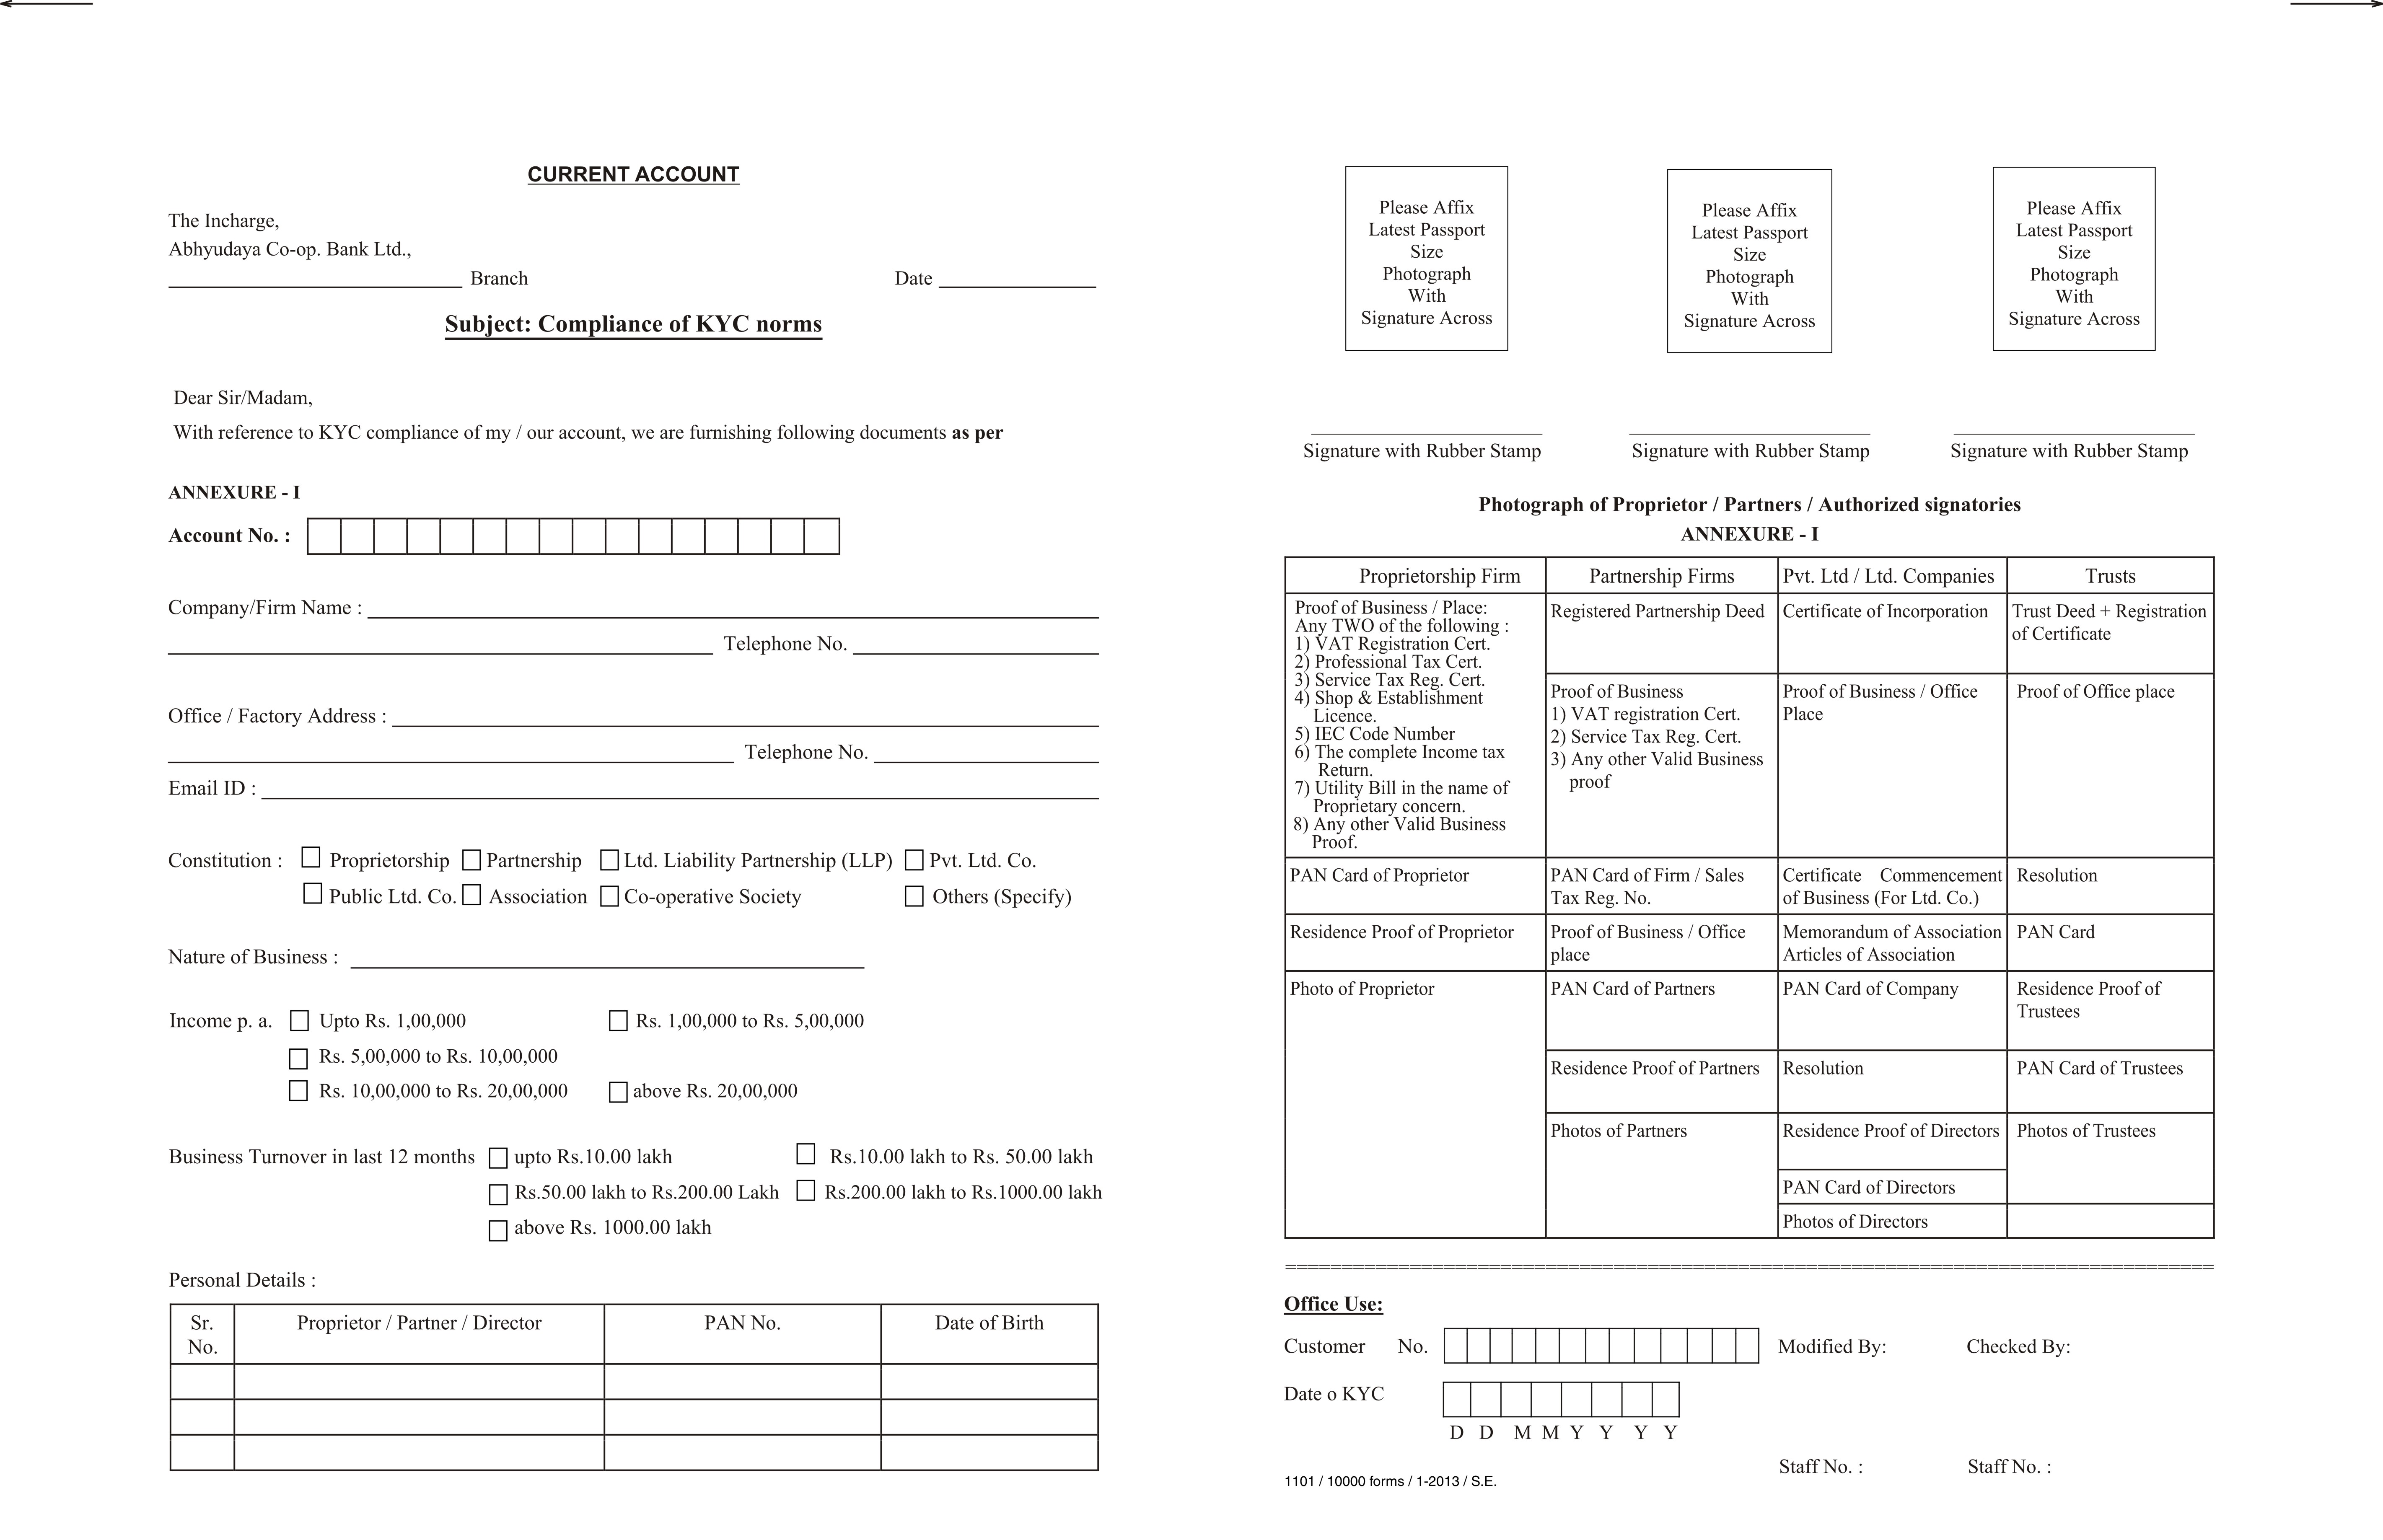 bank kyc form pdf You can download to on site ...